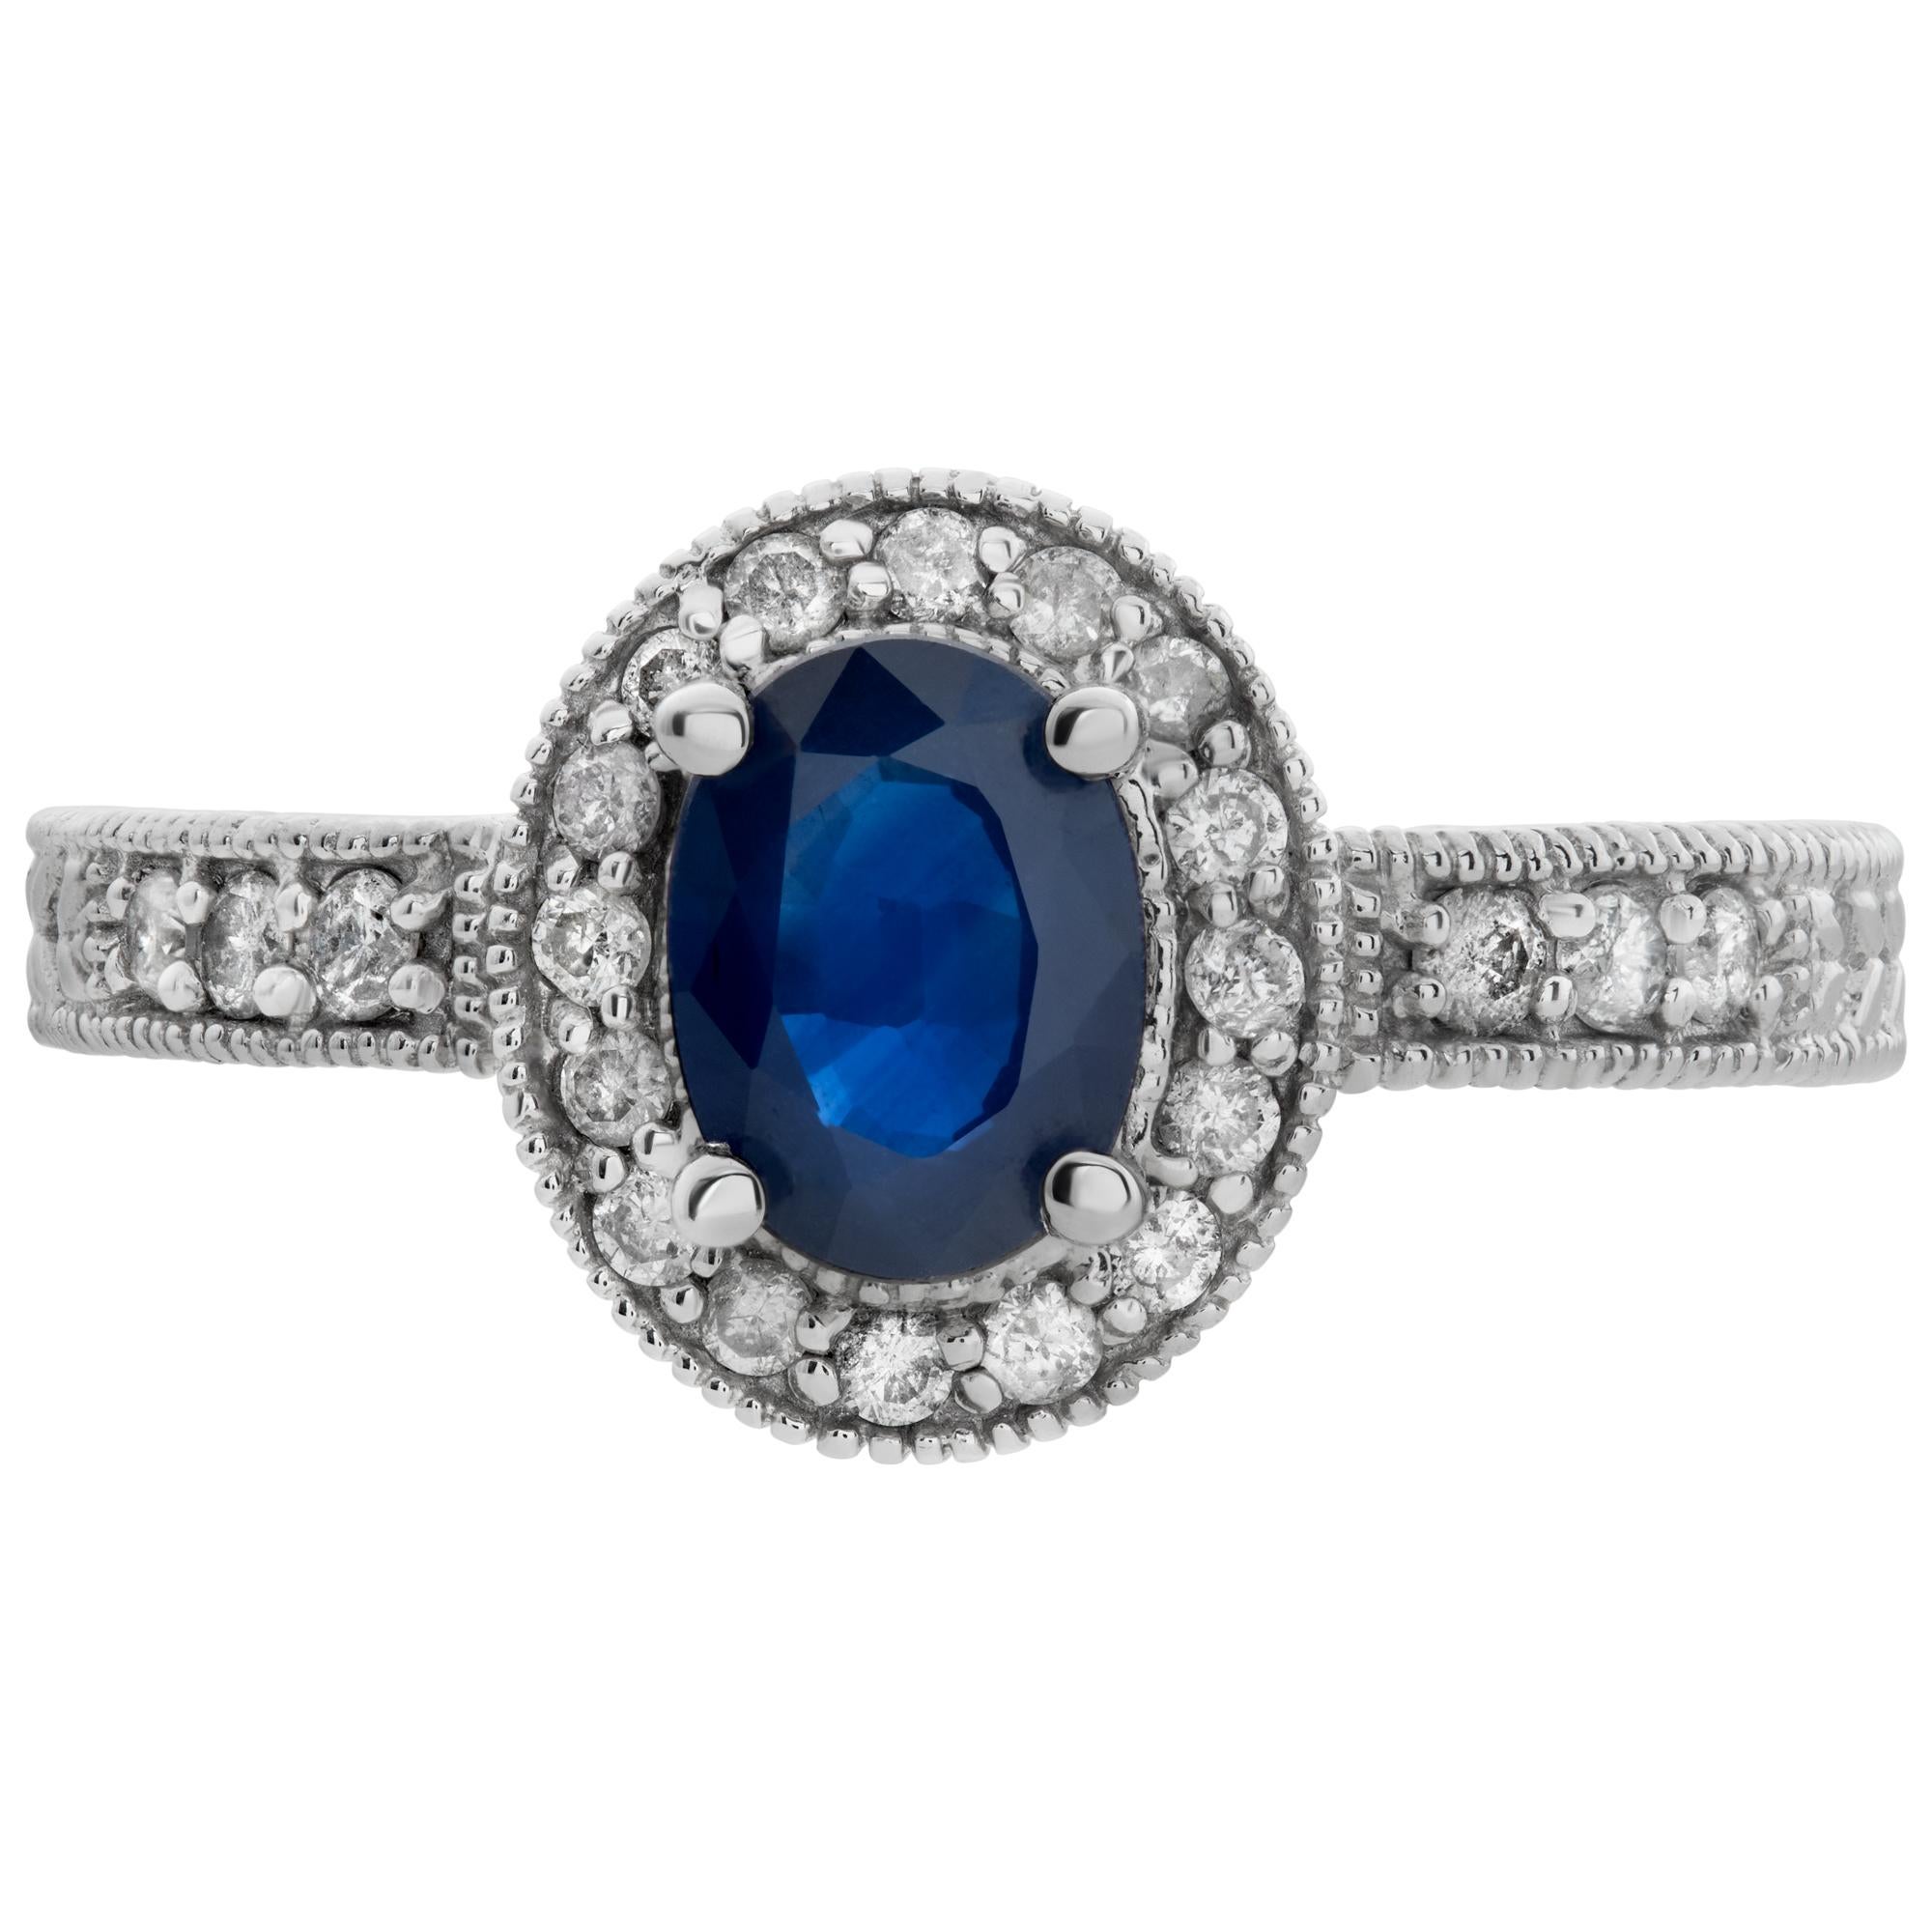 Oval brilliant cut sapphire & diamonds ring set in 14k white gold. Oval brilliant cut sapphire approx weight: 1.00 carat. Full cut round brilliant diamonds approx. total weight: 0.25 carat. Front: 12x 10 mm. Size 7This Diamond/Sapphires ring is